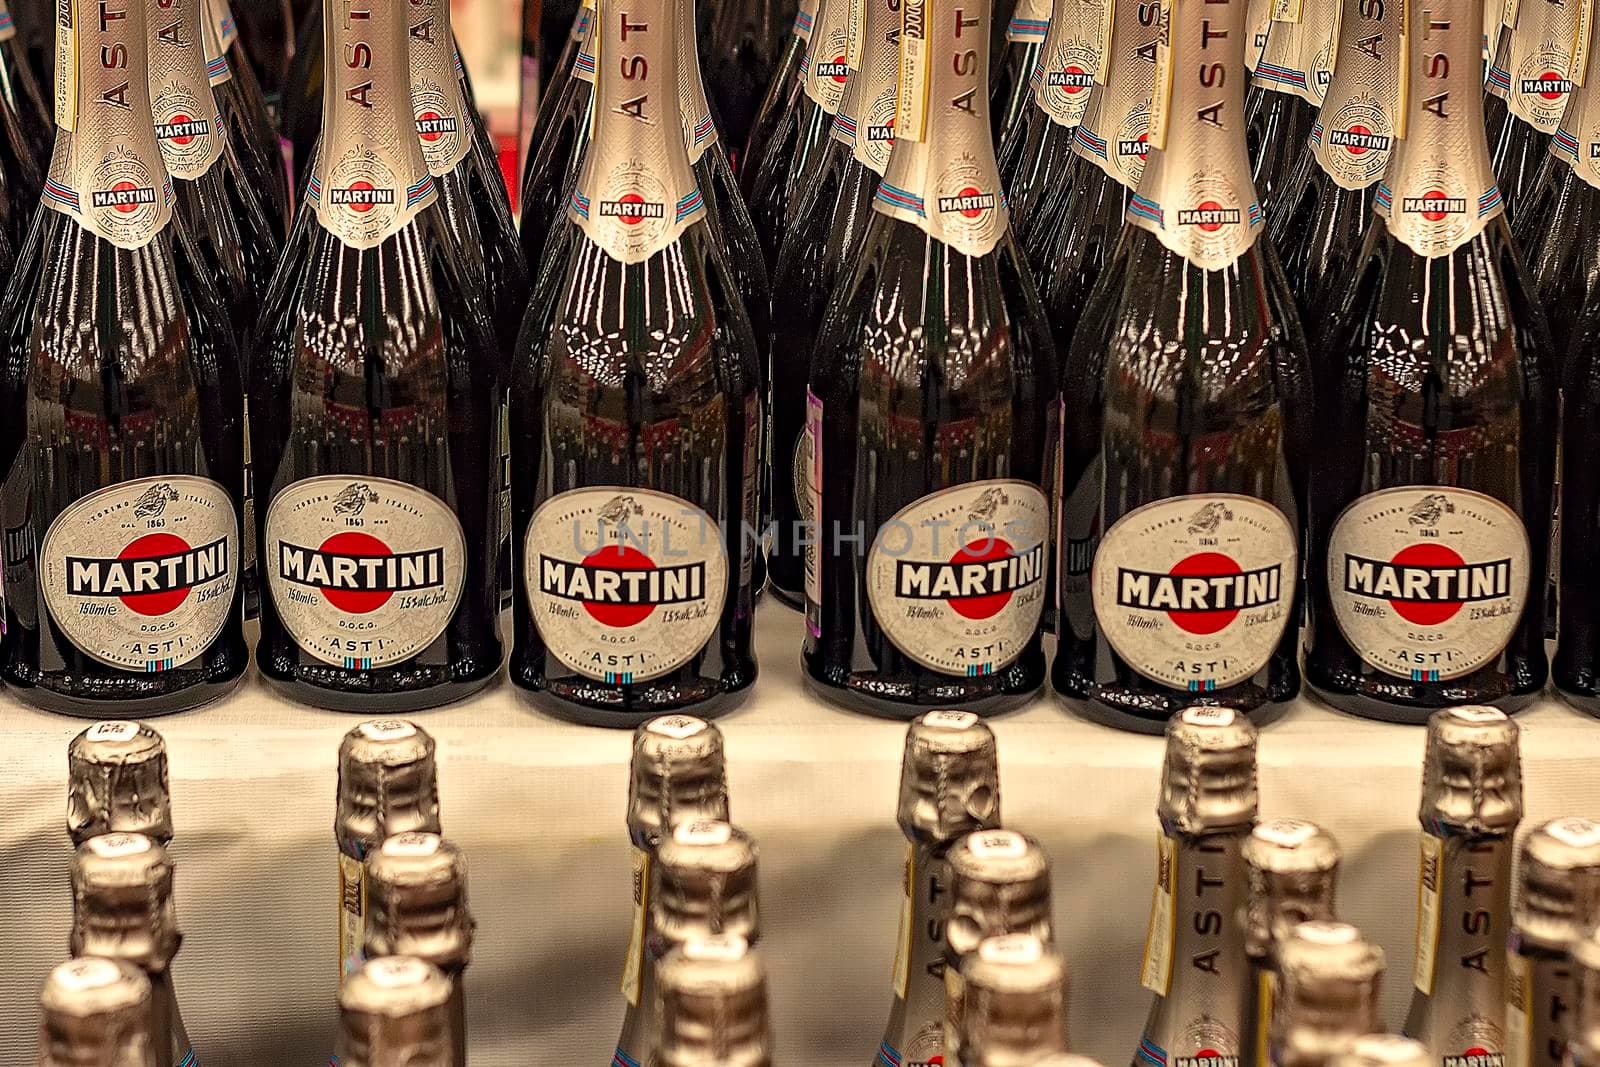 Rows of bottles of Asti Martini bottles in store. by Essffes